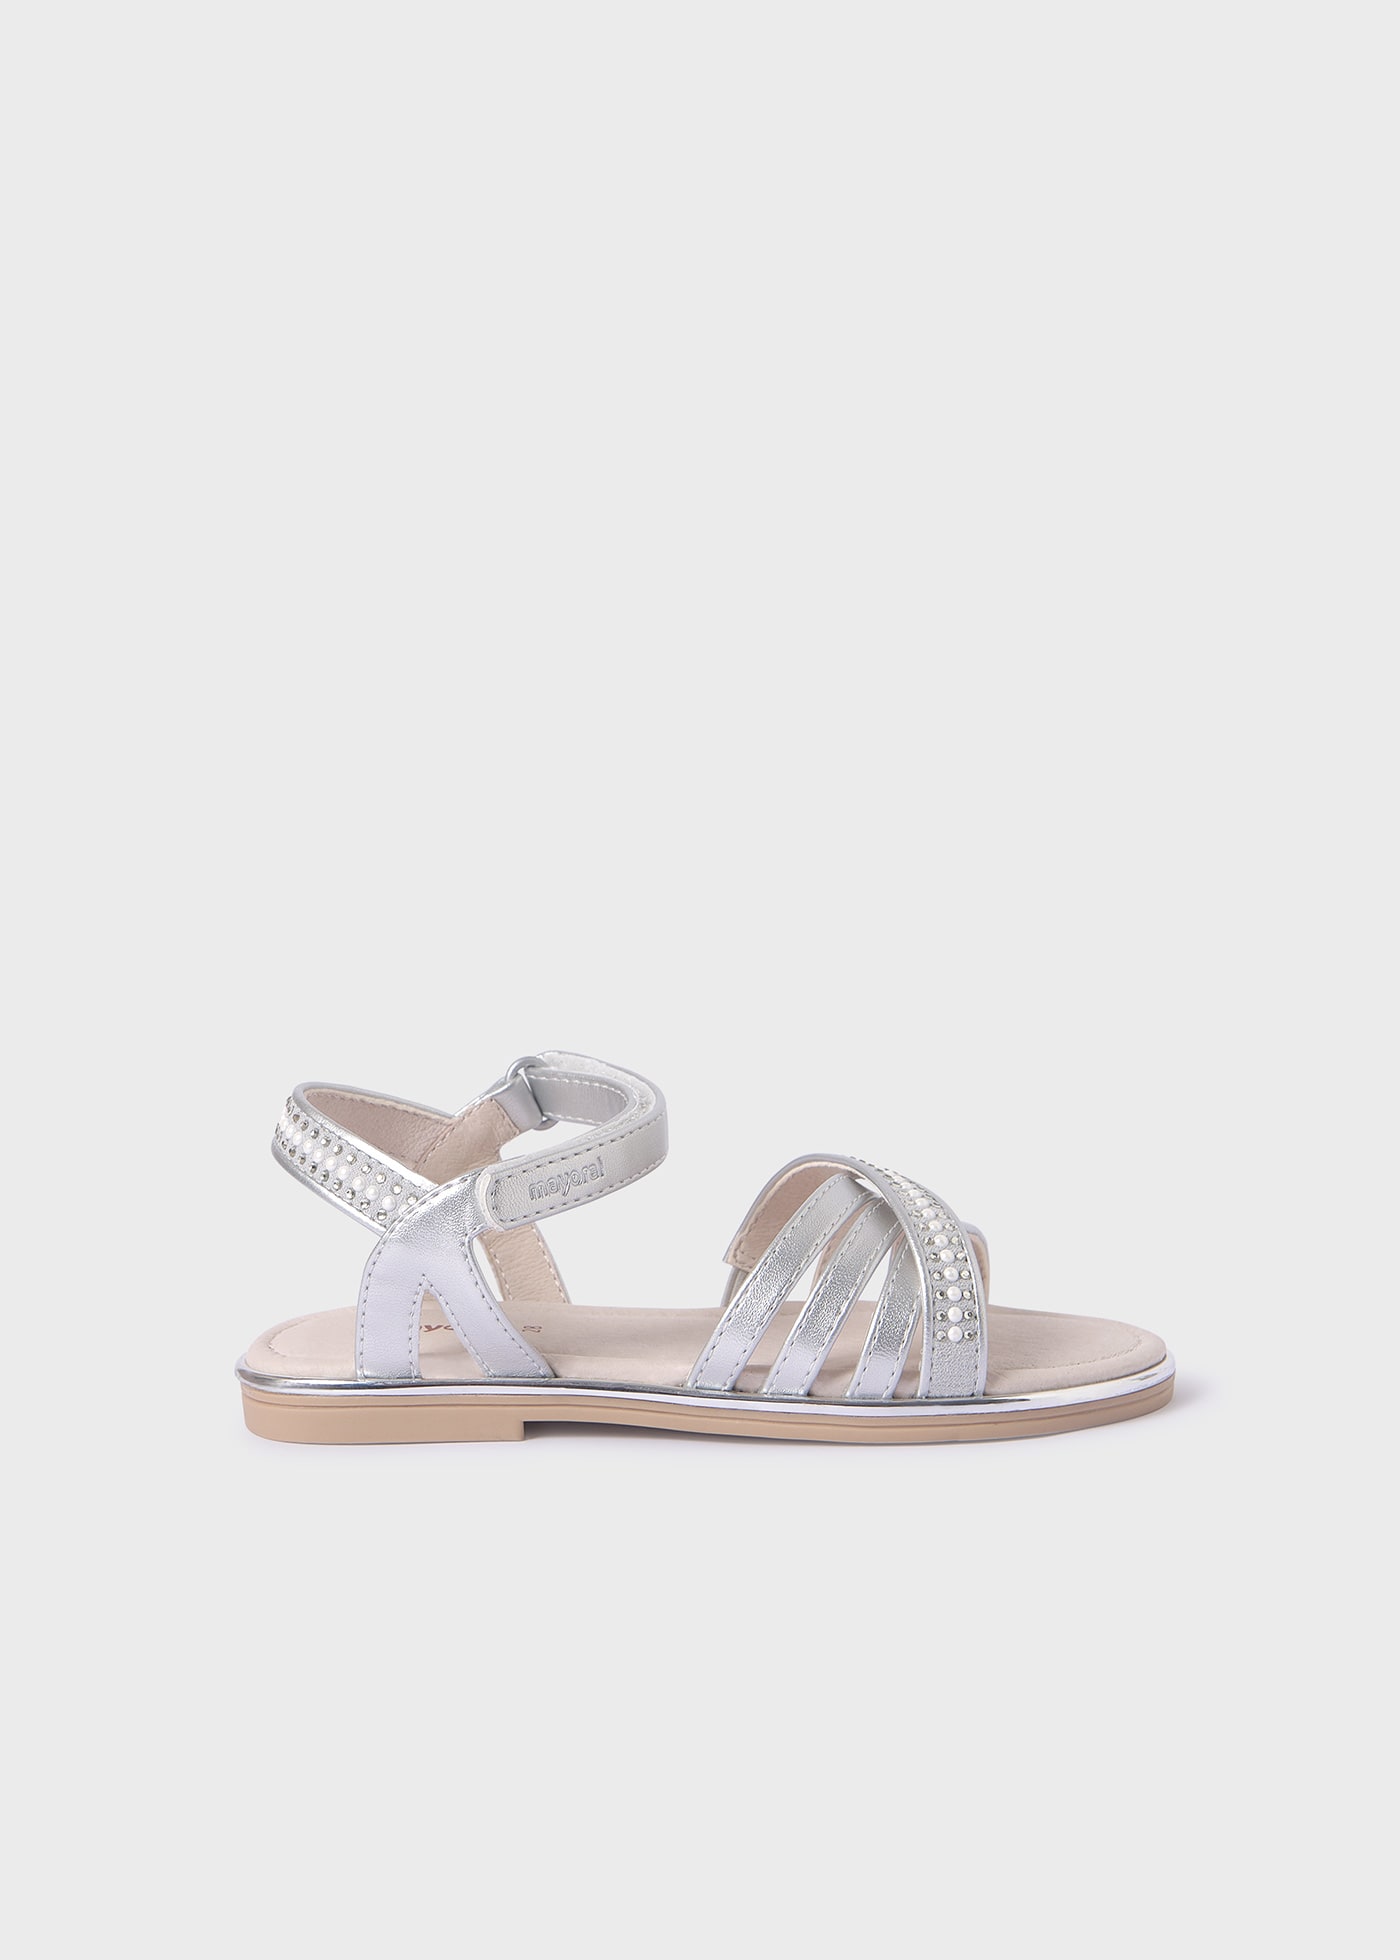 Girls strass sandals sustainable leather